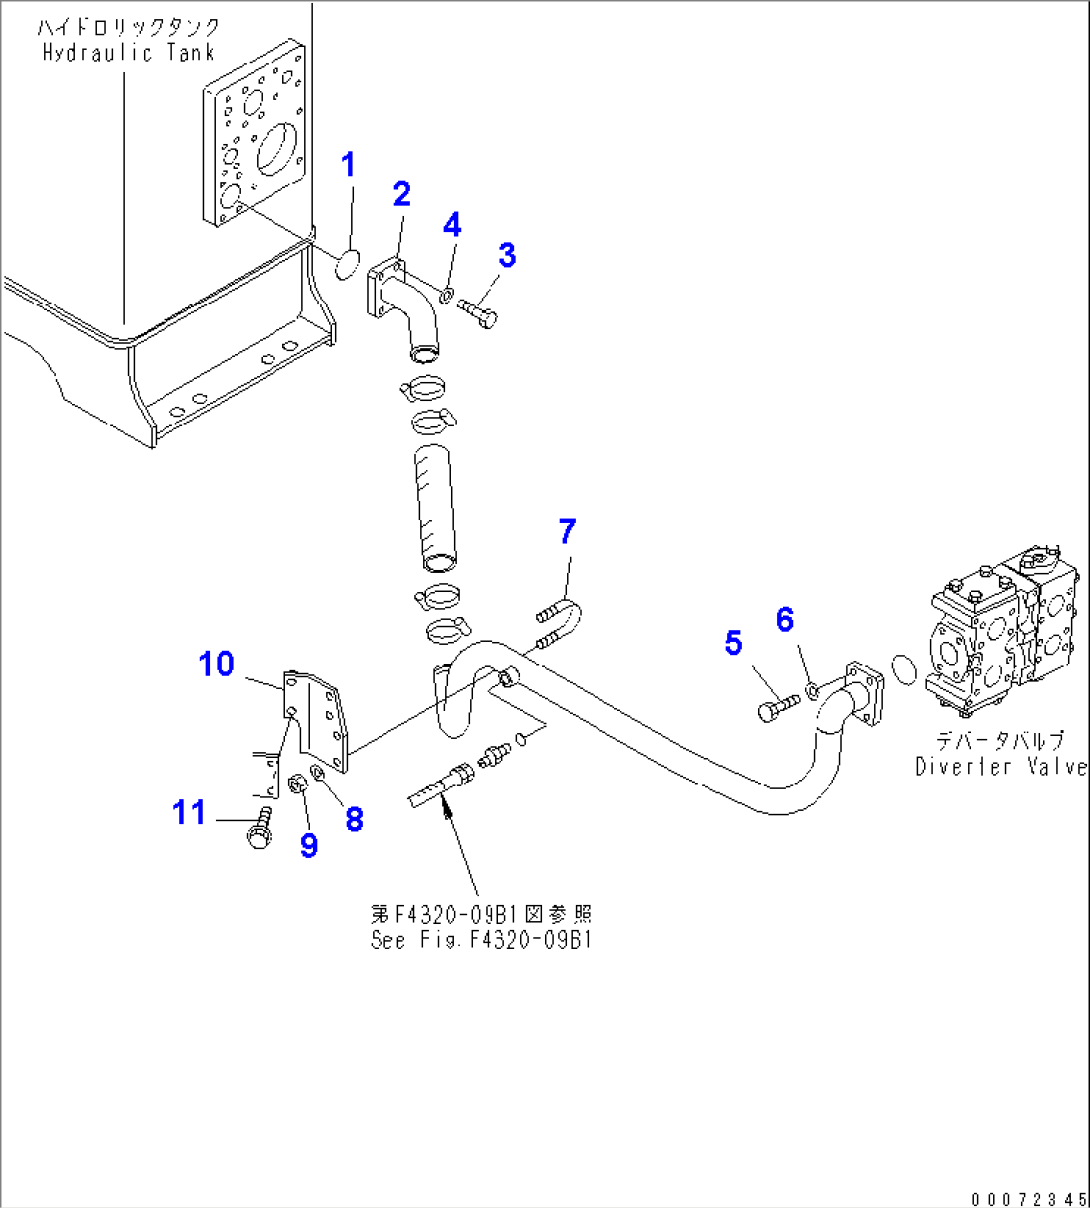 EMERGENCY STEERING PIPING (SUCTION PIPING) (-40ßC SPEC.)(#52406-)